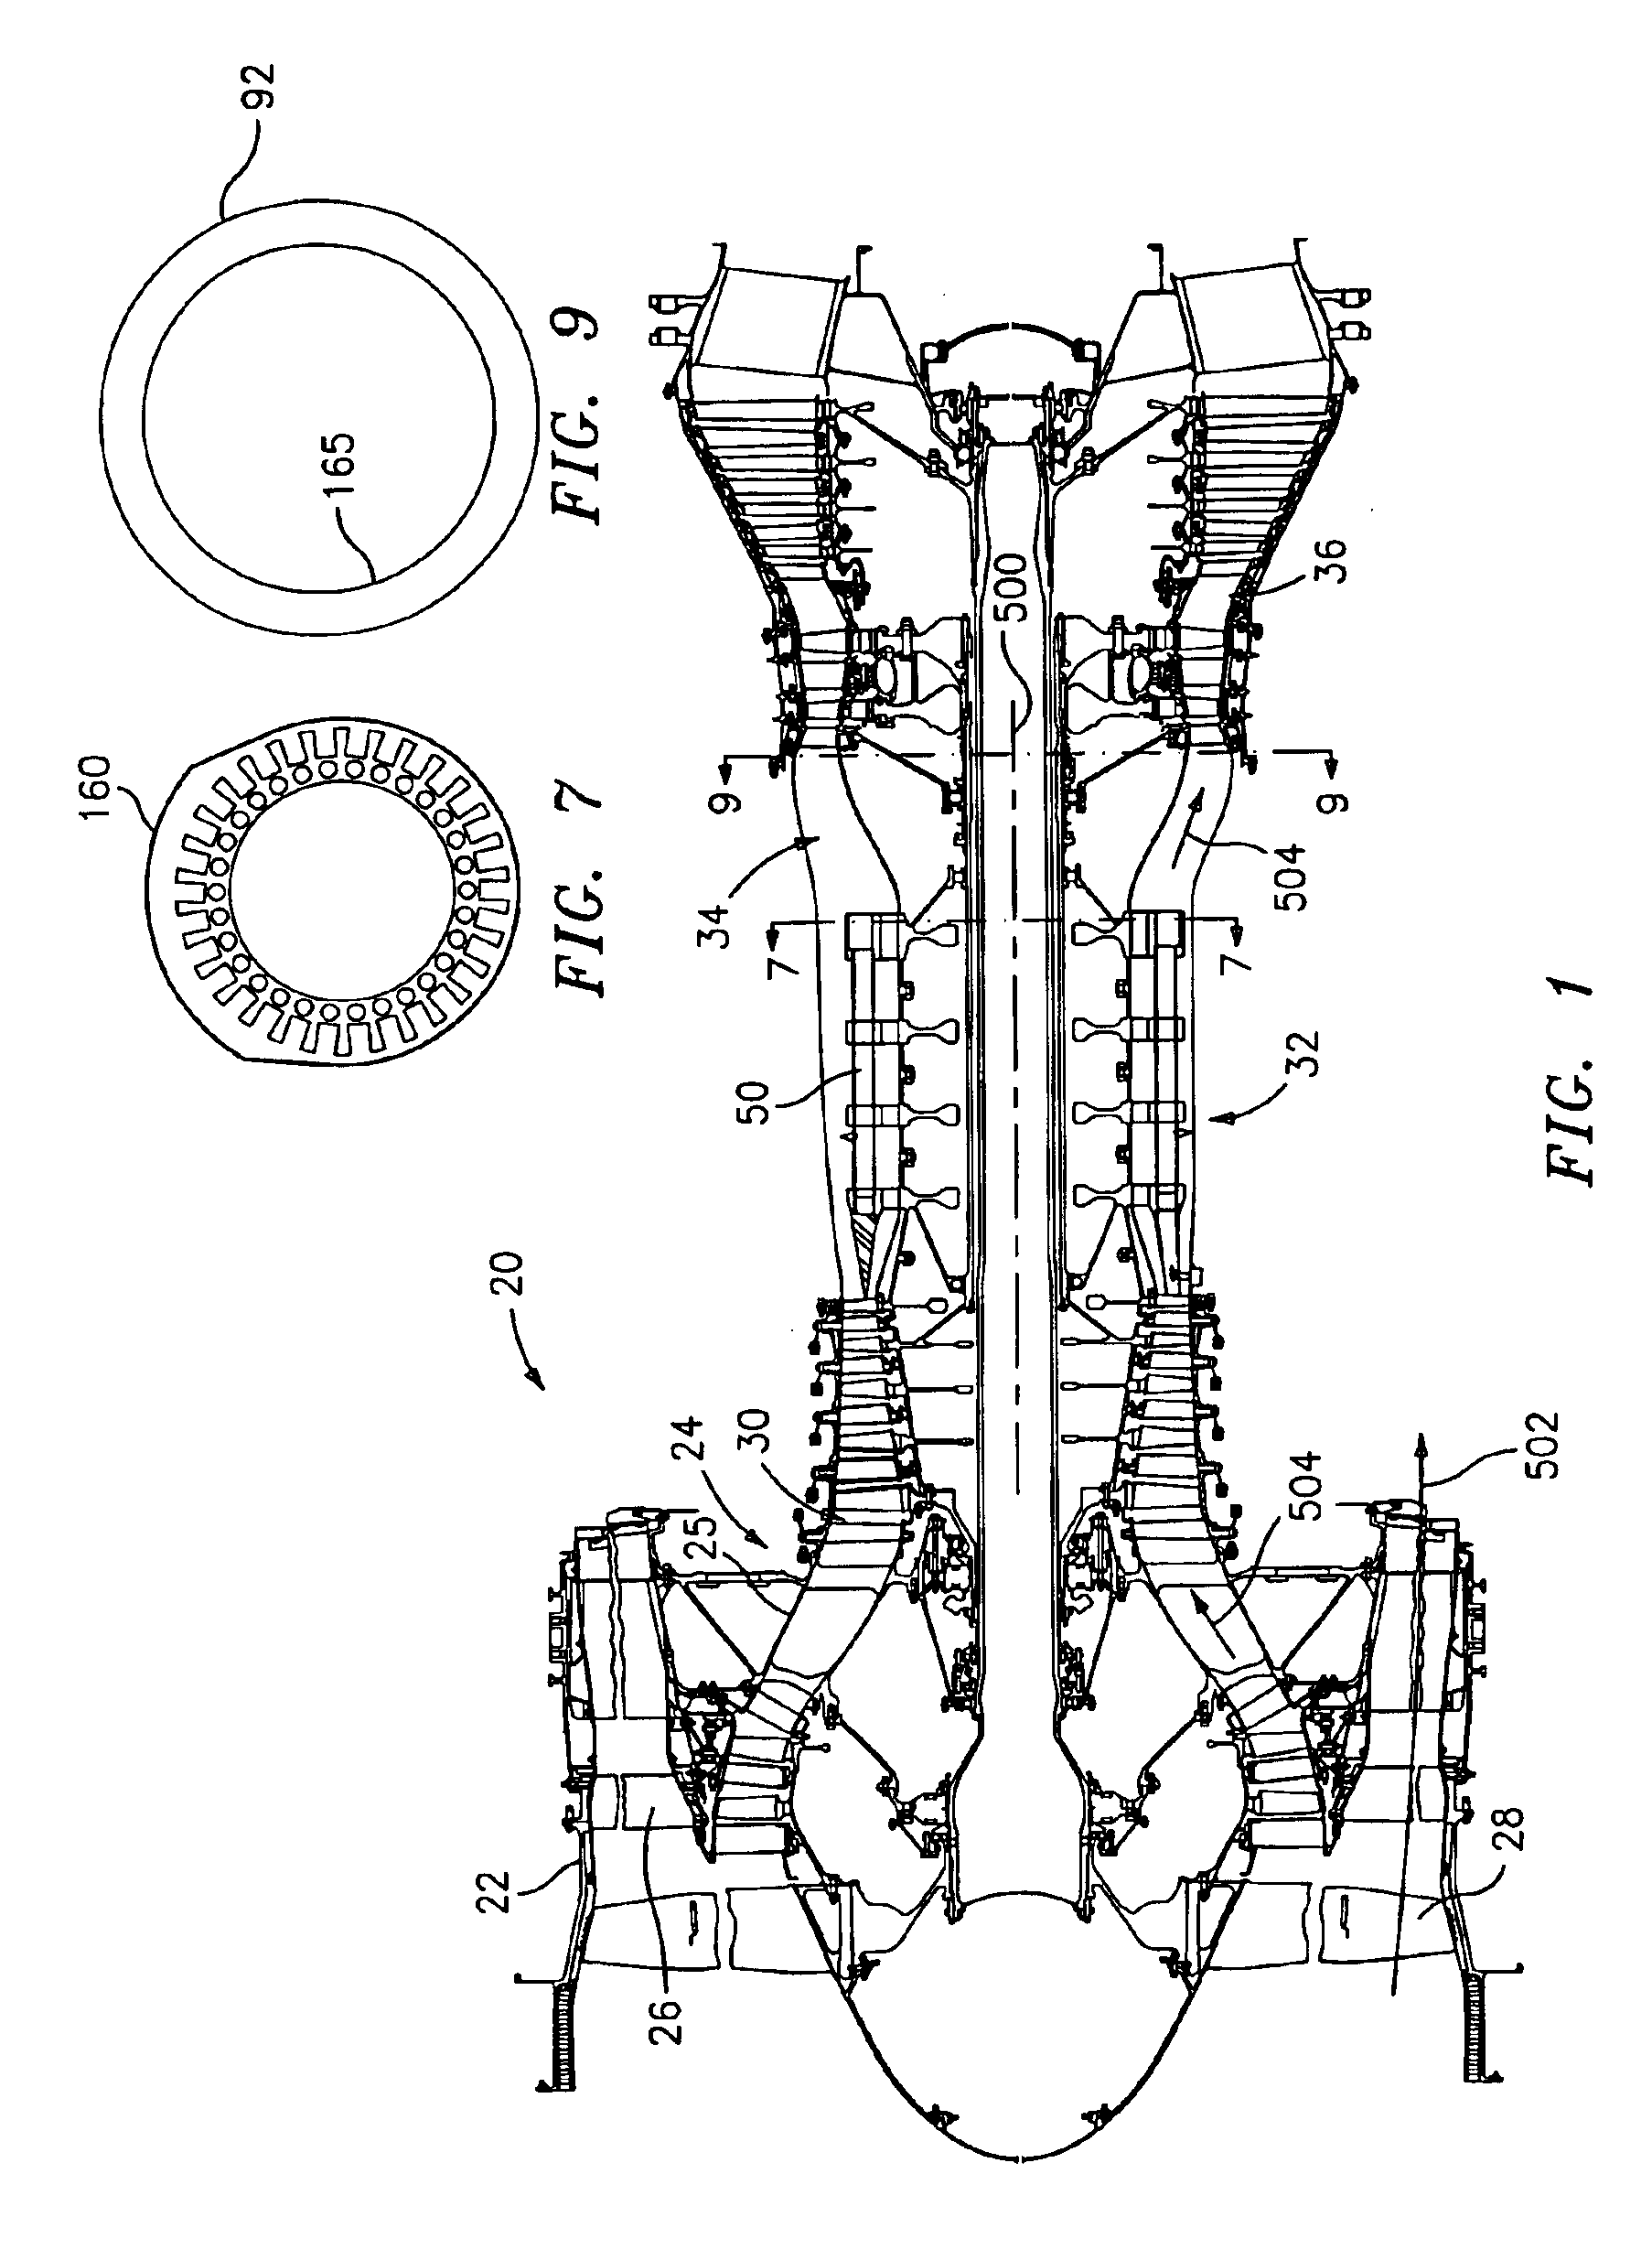 Pulsed combustion engine